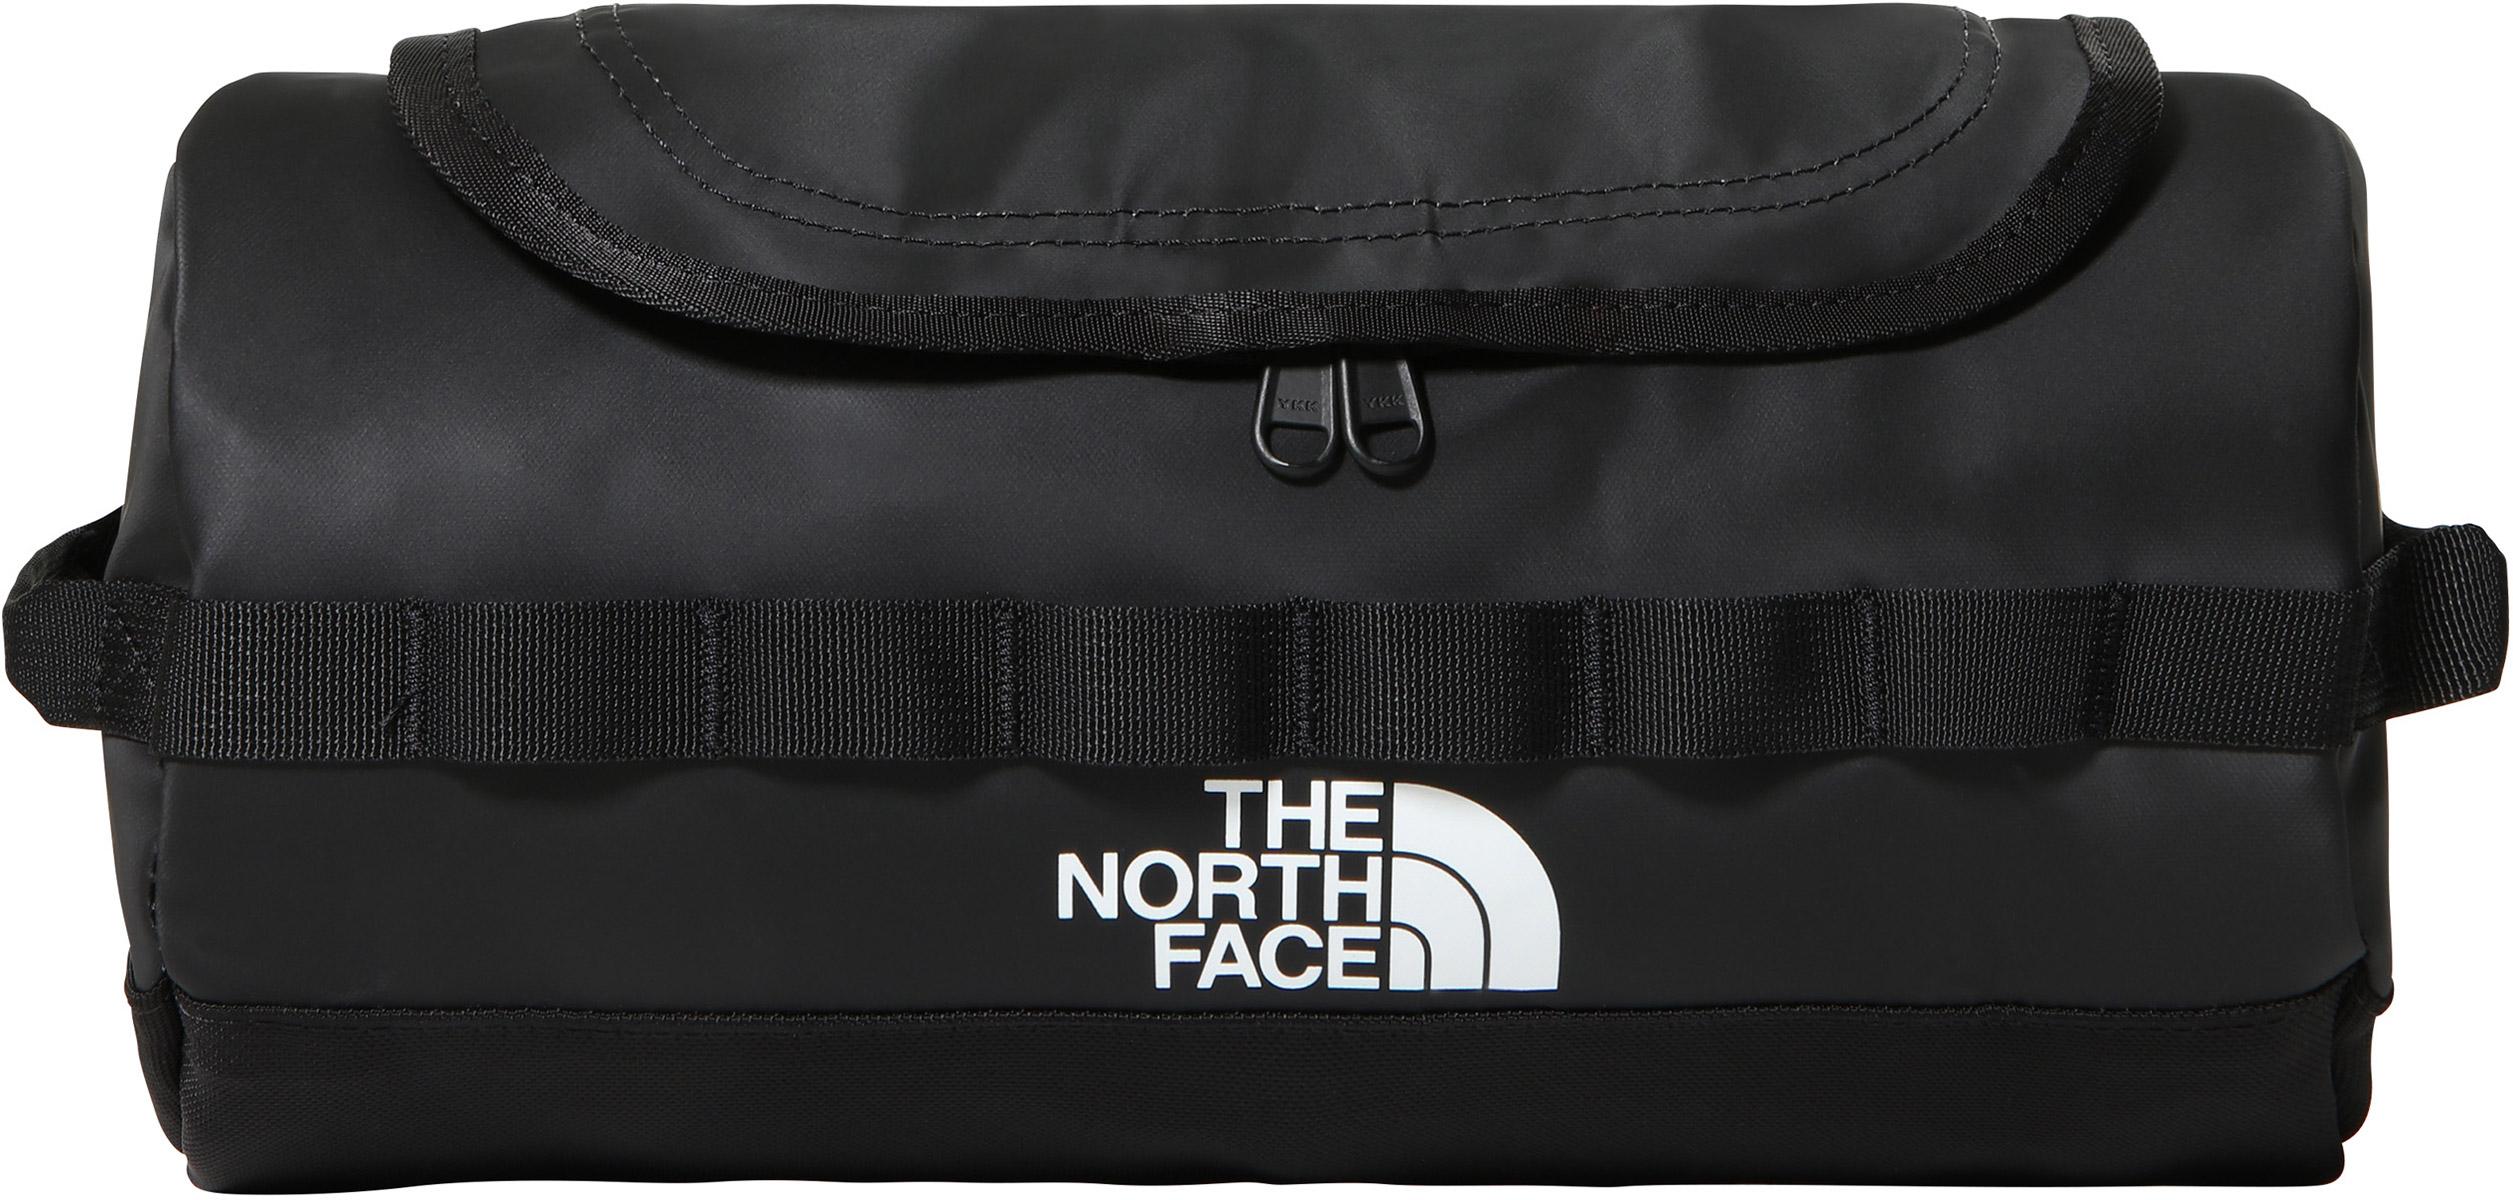 The North Face Travel Canister (large) Aw21  Tnf Black/tnf White